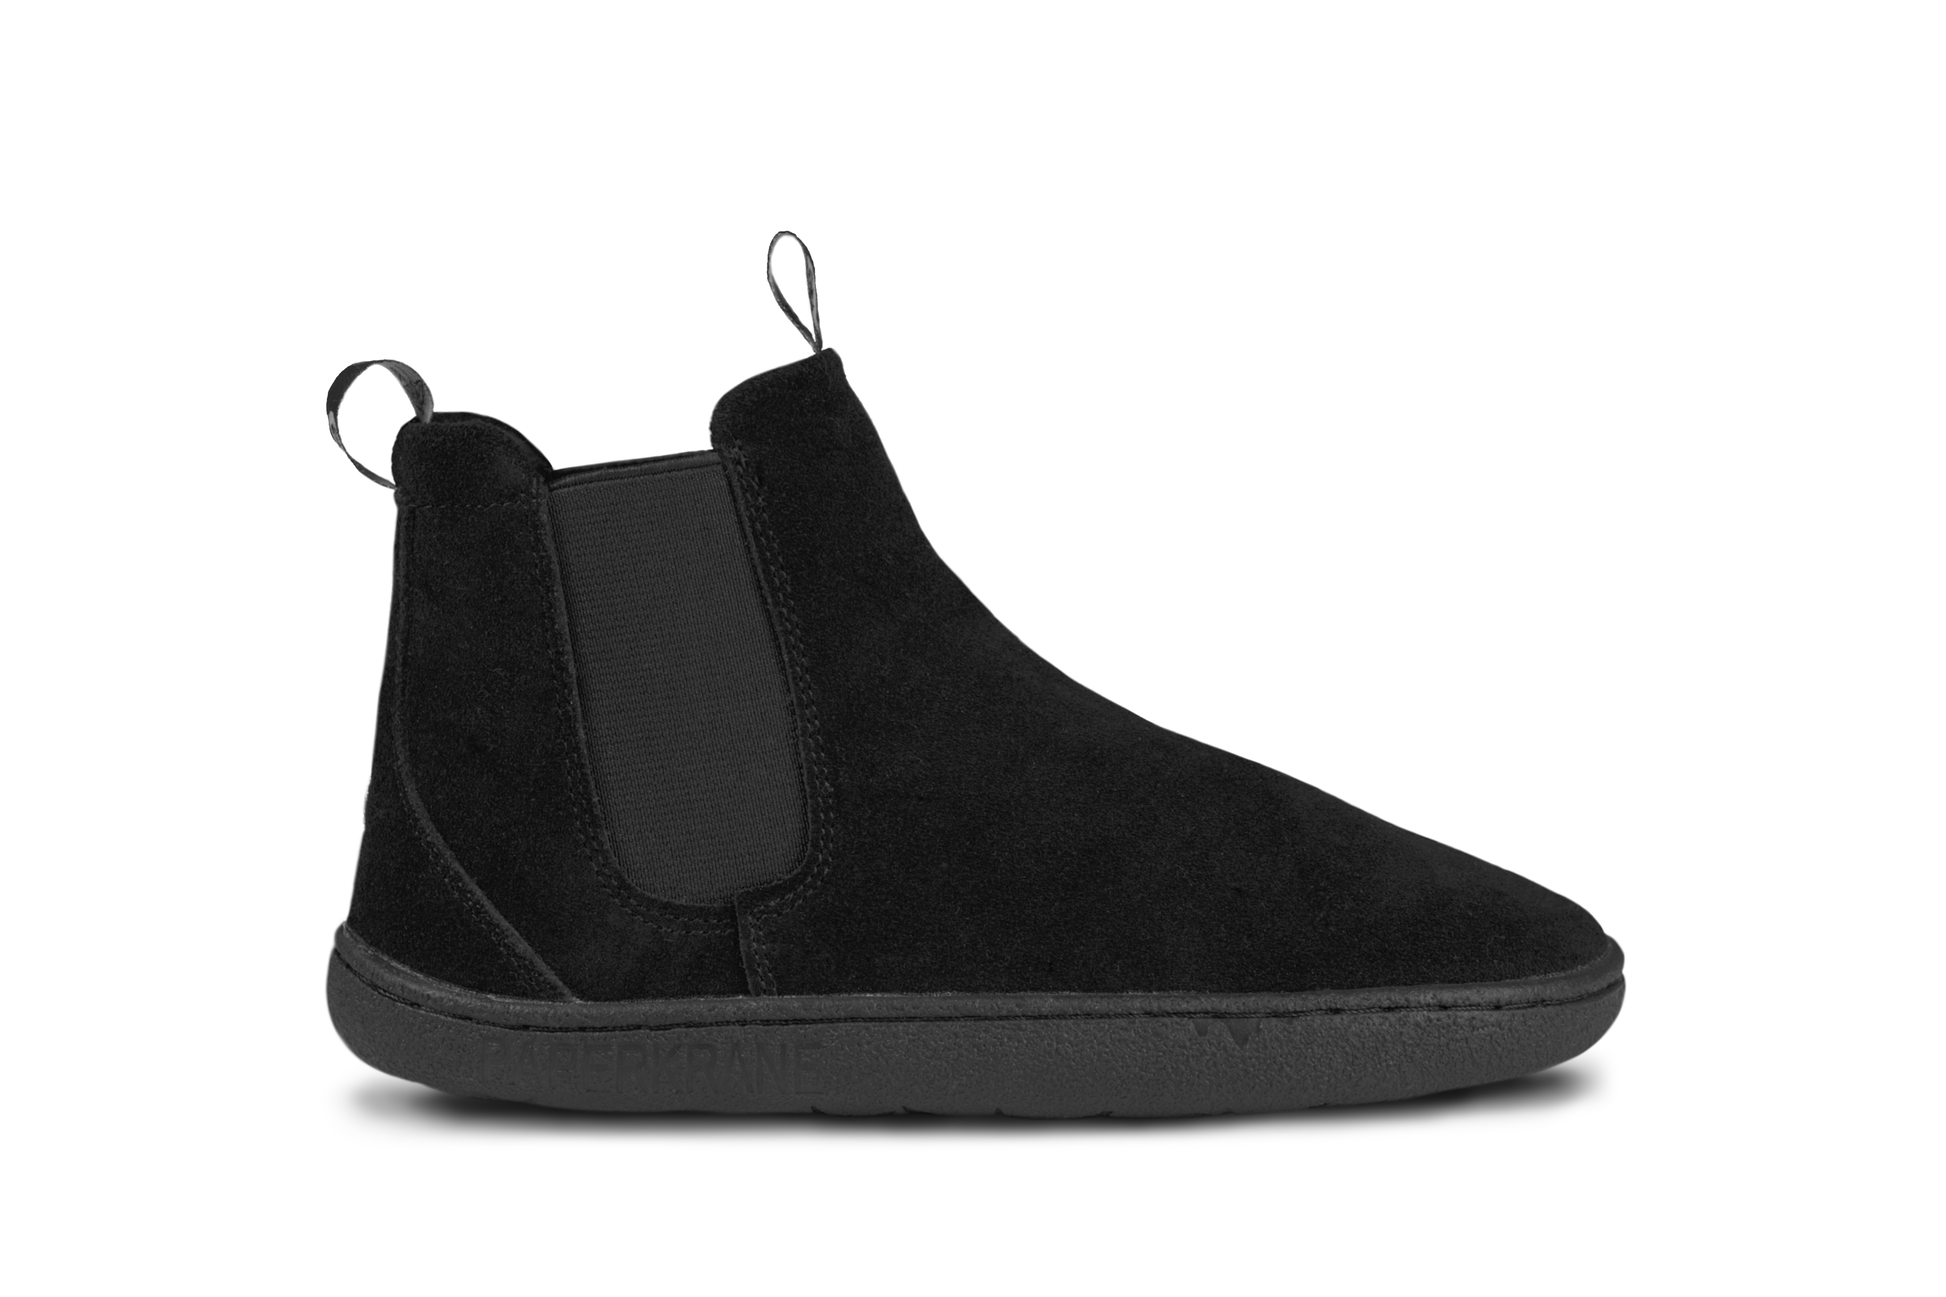 OUTSIDE VIEW OF SUEDE SHADE JNR CHELSEA BOOTS